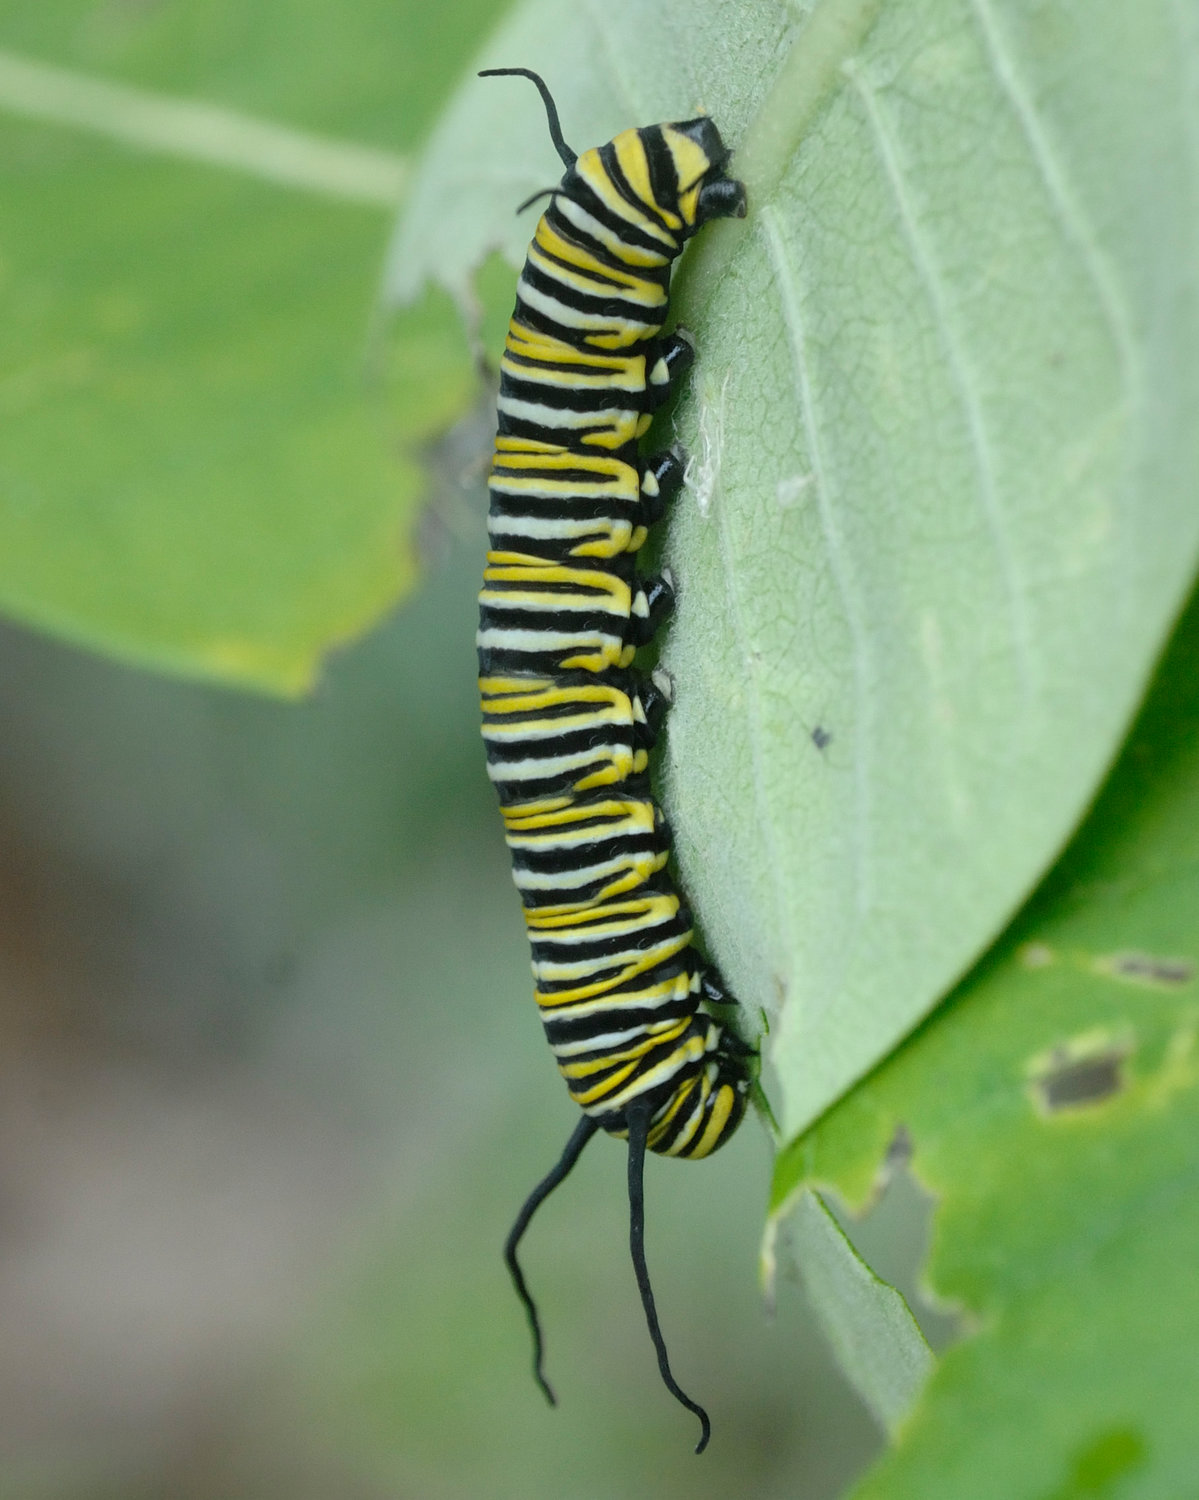 Monarch larvae are very tiny after hatching; they grow quickly as they feed on milkweed leaves. As they grow, they shed their skin, or molt. Each molt is called an instar.  Caterpillars have six true legs at the thorax near its head, then four pairs of prolegs, or temporary legs, for helping them get around in the larval stage. Each proleg has a pad on its bottom which helps caterpillars keep a grip on milkweed leaves. The white spots on this individual's prolegs and its large size indicate that it is in its fifth instar, the last instar before it pupates and forms a chrysalis.....